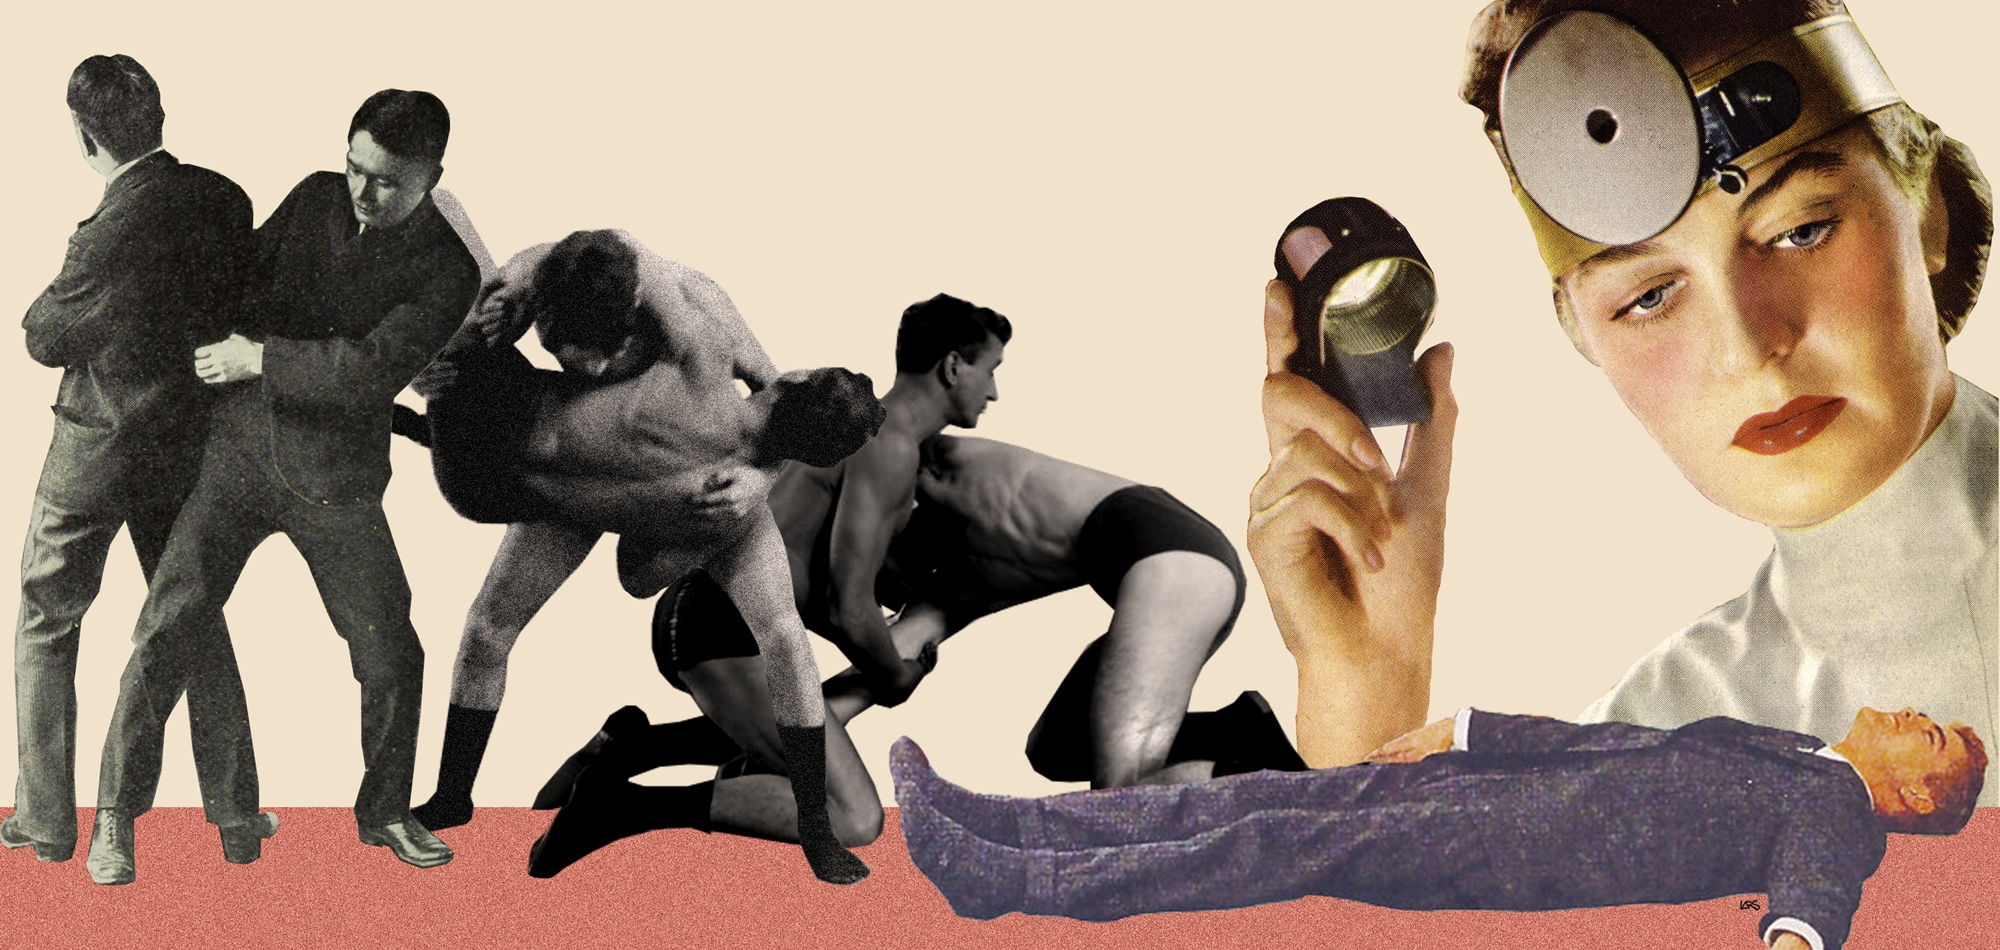 Masculinities, body and health